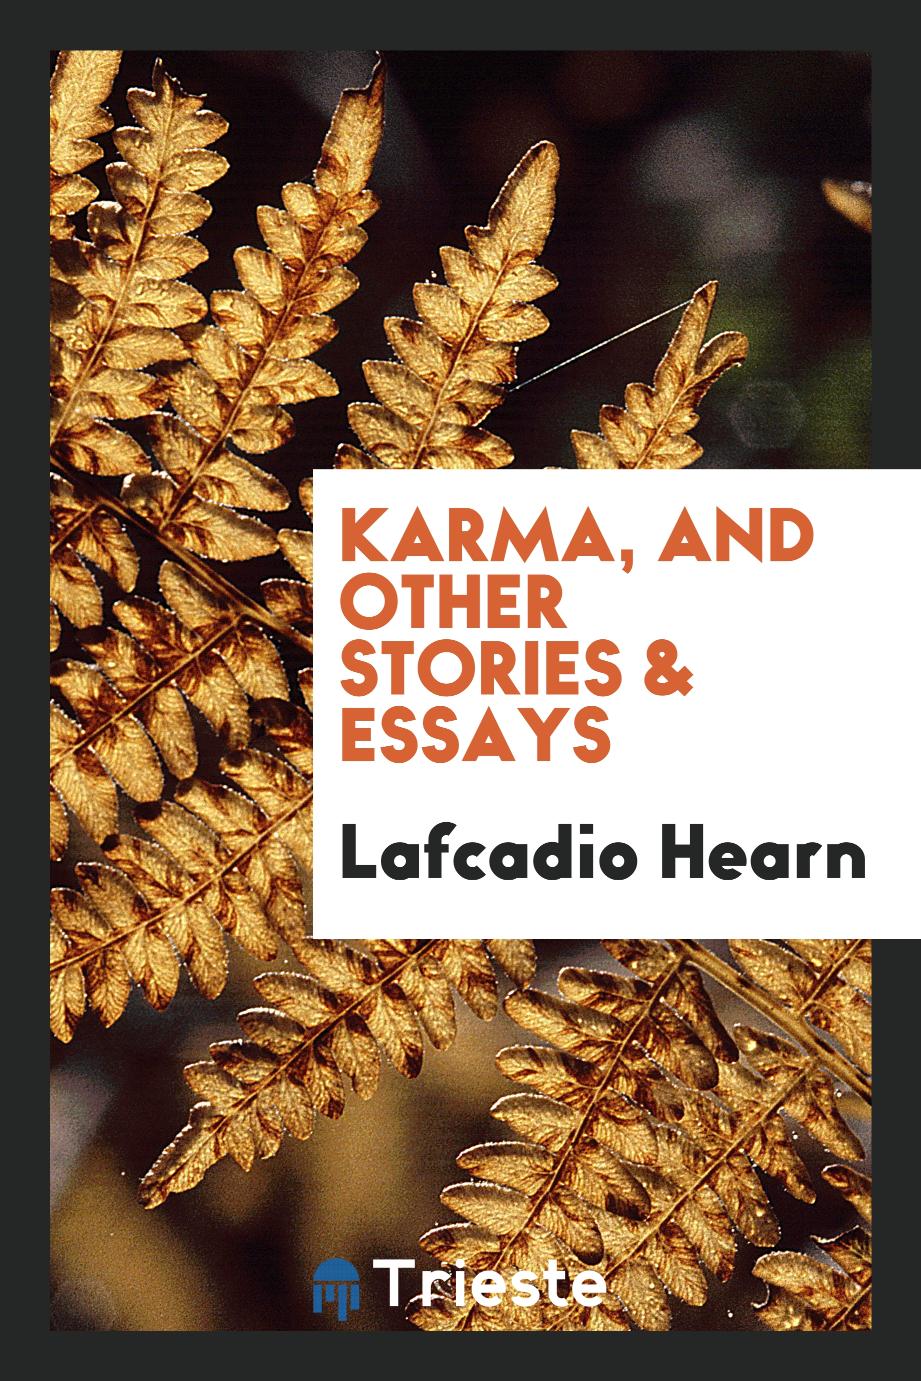 Karma, and other stories & essays